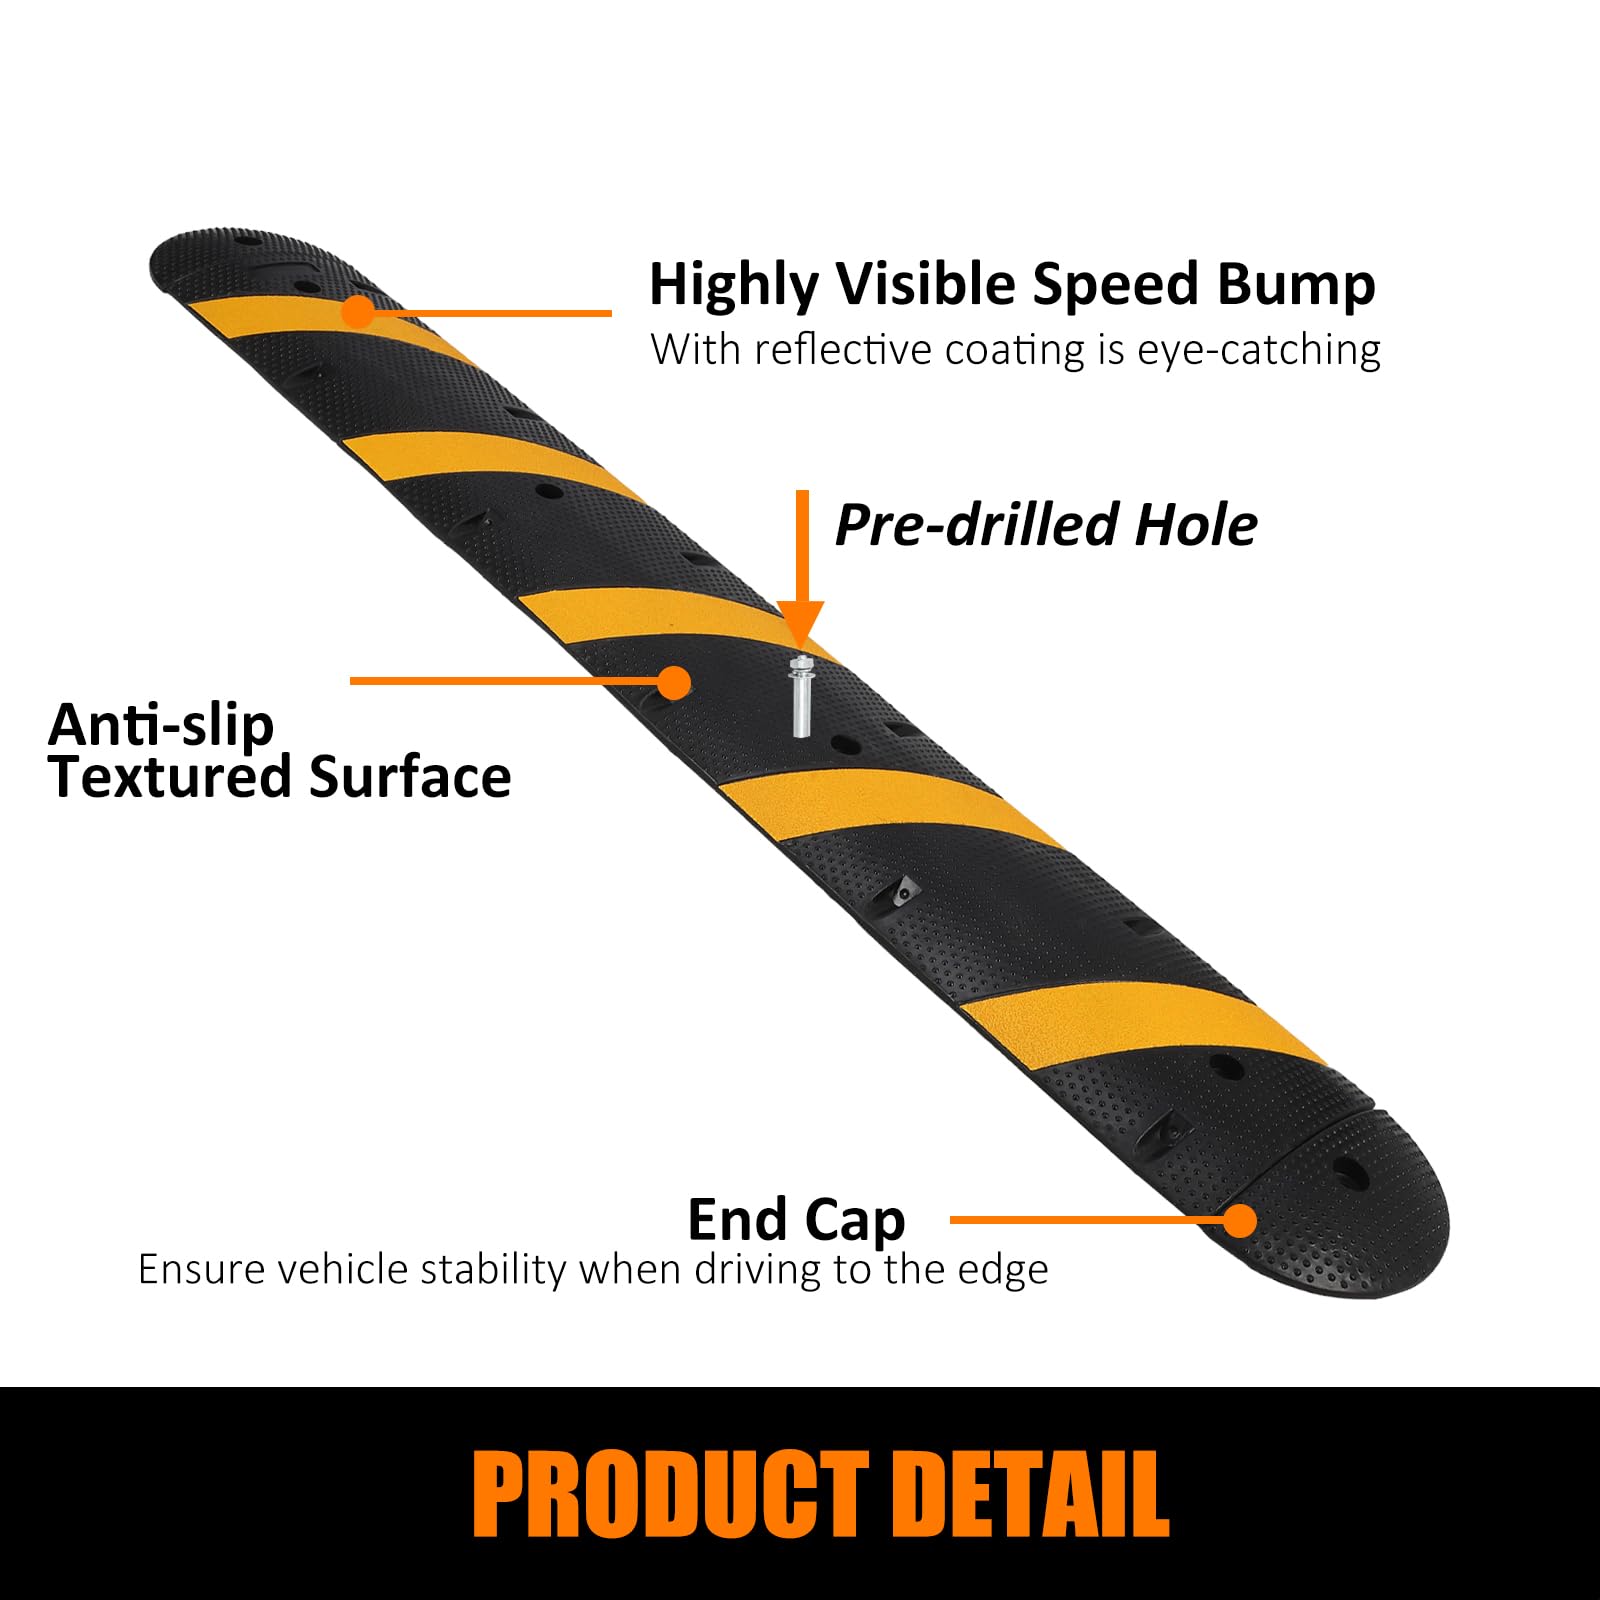 6 Ft Rubber Speed Bump, 2 Channel Modular Heavy Duty Speed Bumps Humps 25000 lbs Load Capacity, Cable Protector Ramp with 2 End Caps for Asphalt Concrete Gravel Driveway Road